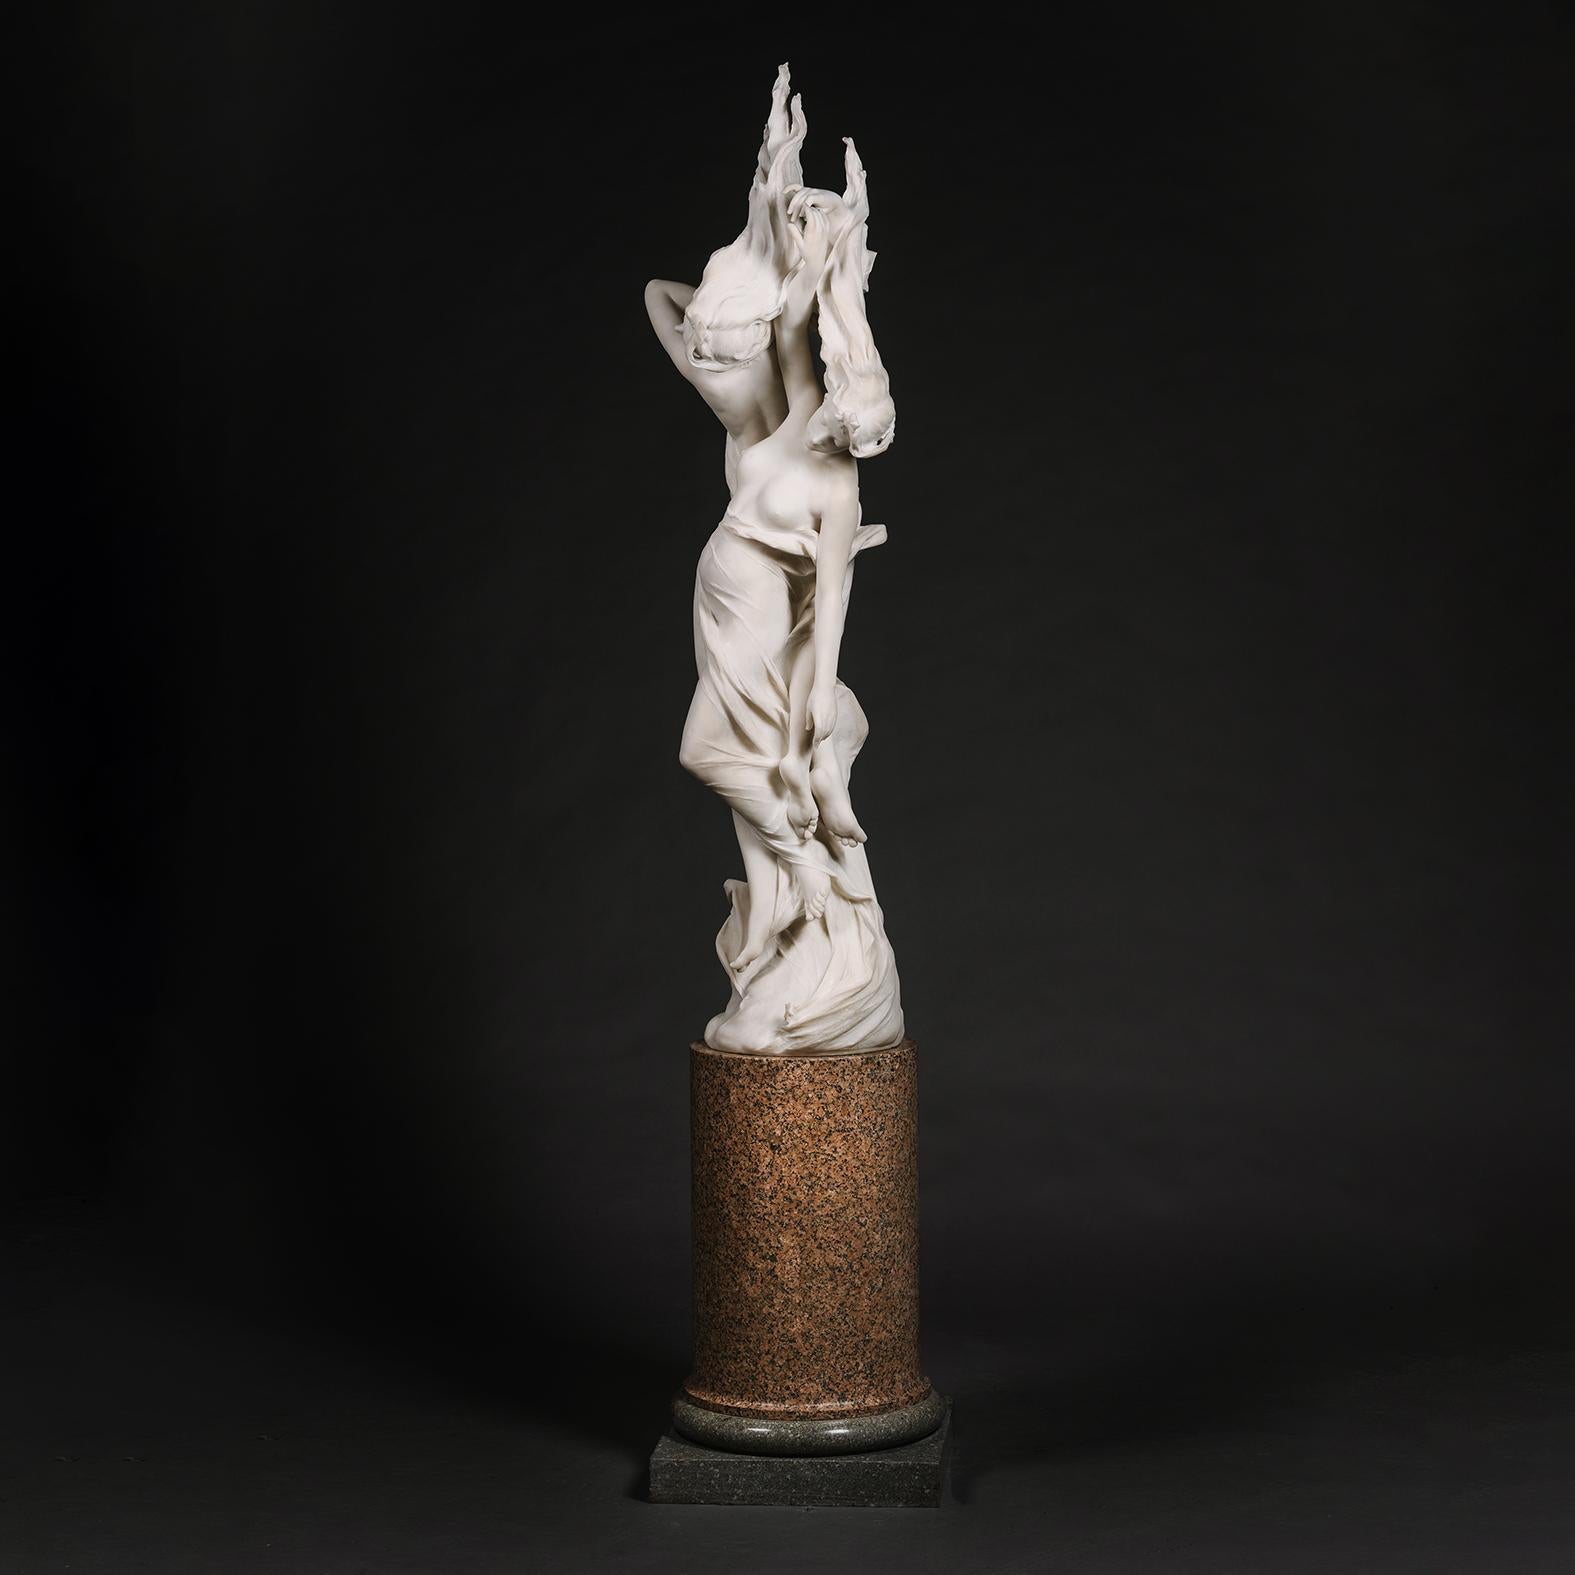 An Exceptional White Statuary Marble Figural Group of Two Nymphs, Entitled ‘Stelle Cadenti’ (‘Falling Stars’) By Vittorio Caradossi (Italian, 1861-1918).

Sculpted from a single block of the finest white statuary marble, the two intertwined nymphs,